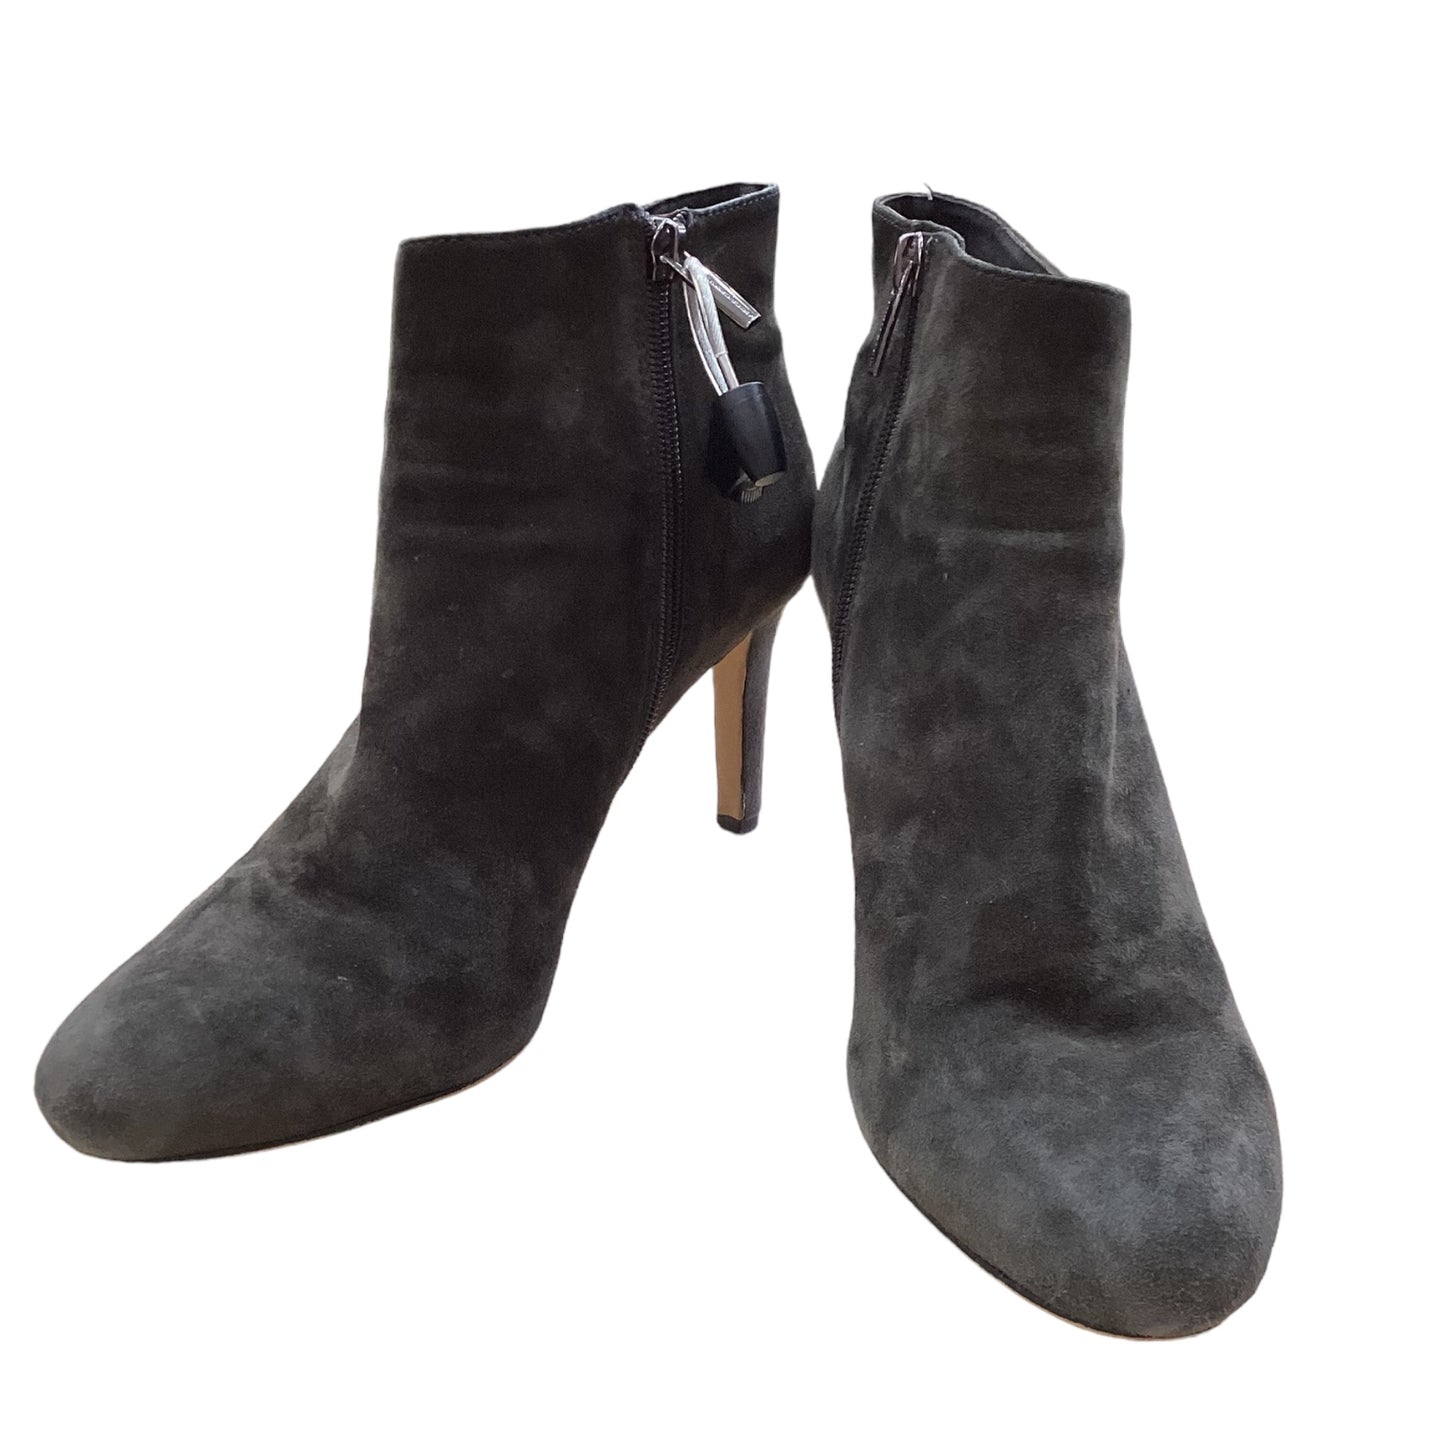 Boots Ankle Heels By Vince Camuto  Size: 9.5